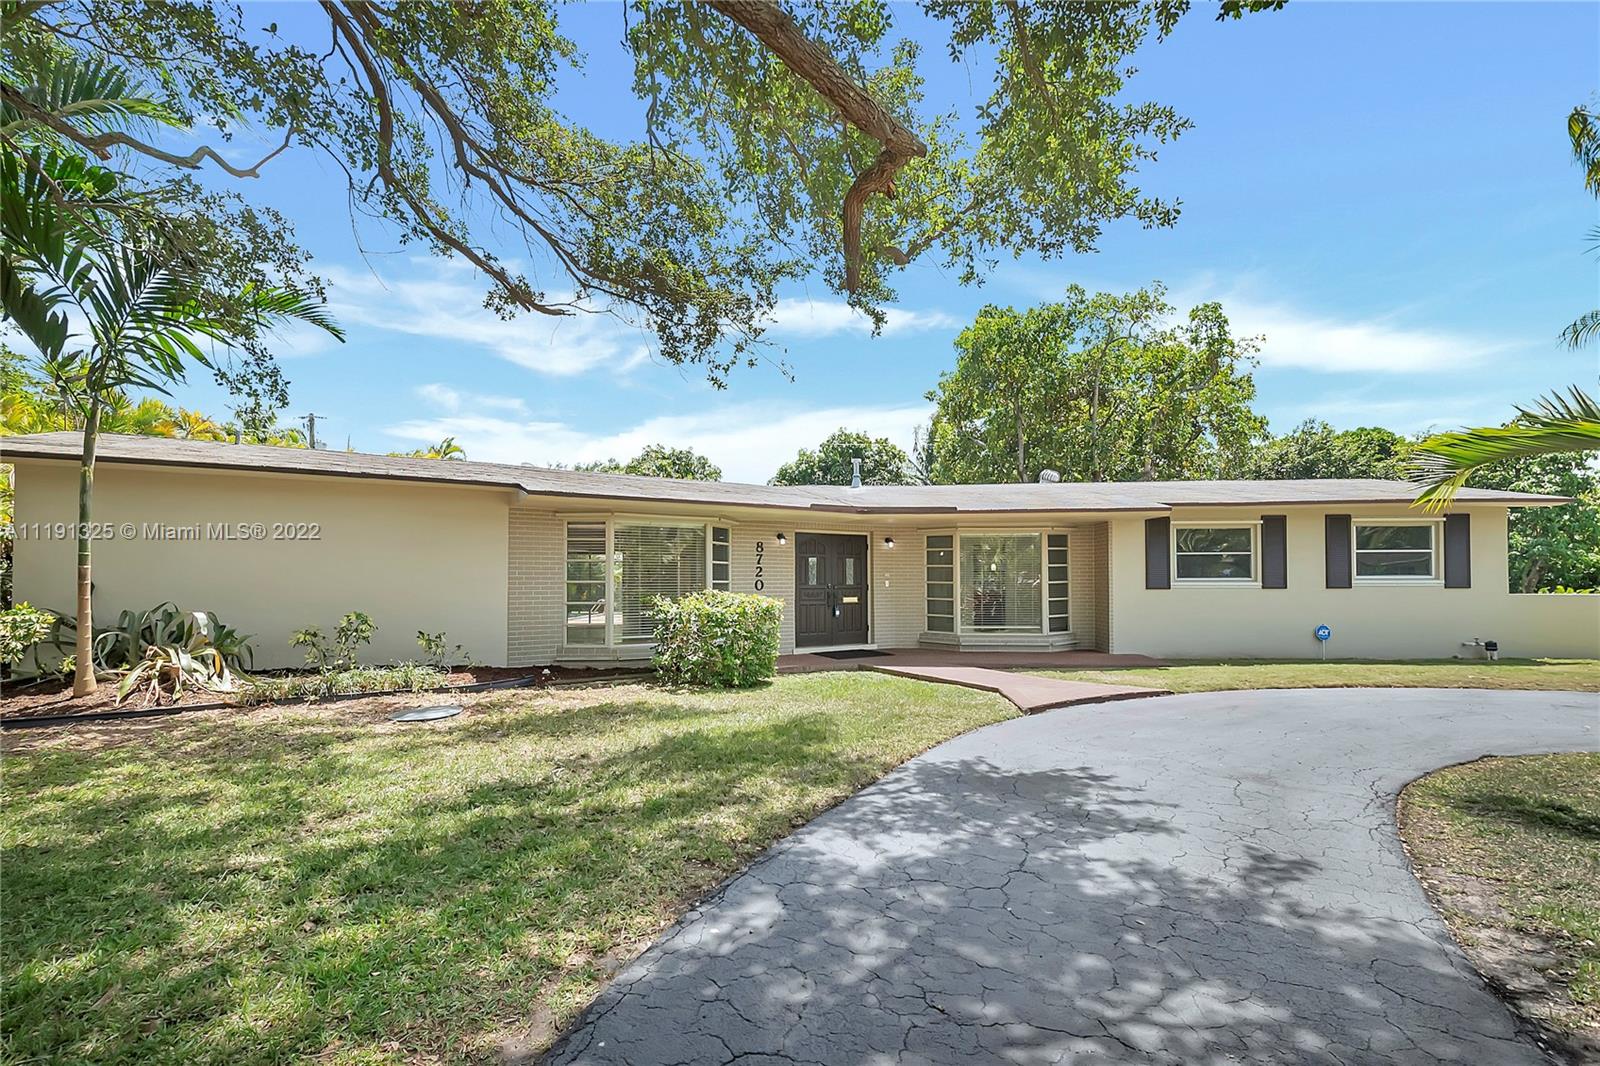 Charming Coral Reef Gardens 4 Bed / 2 Bath home with 2 car garage, circular driveway on a 15,250 square foot lot. Large Covered and screened patio with a pool. Space for a boat or RV. Schedule a showing today.